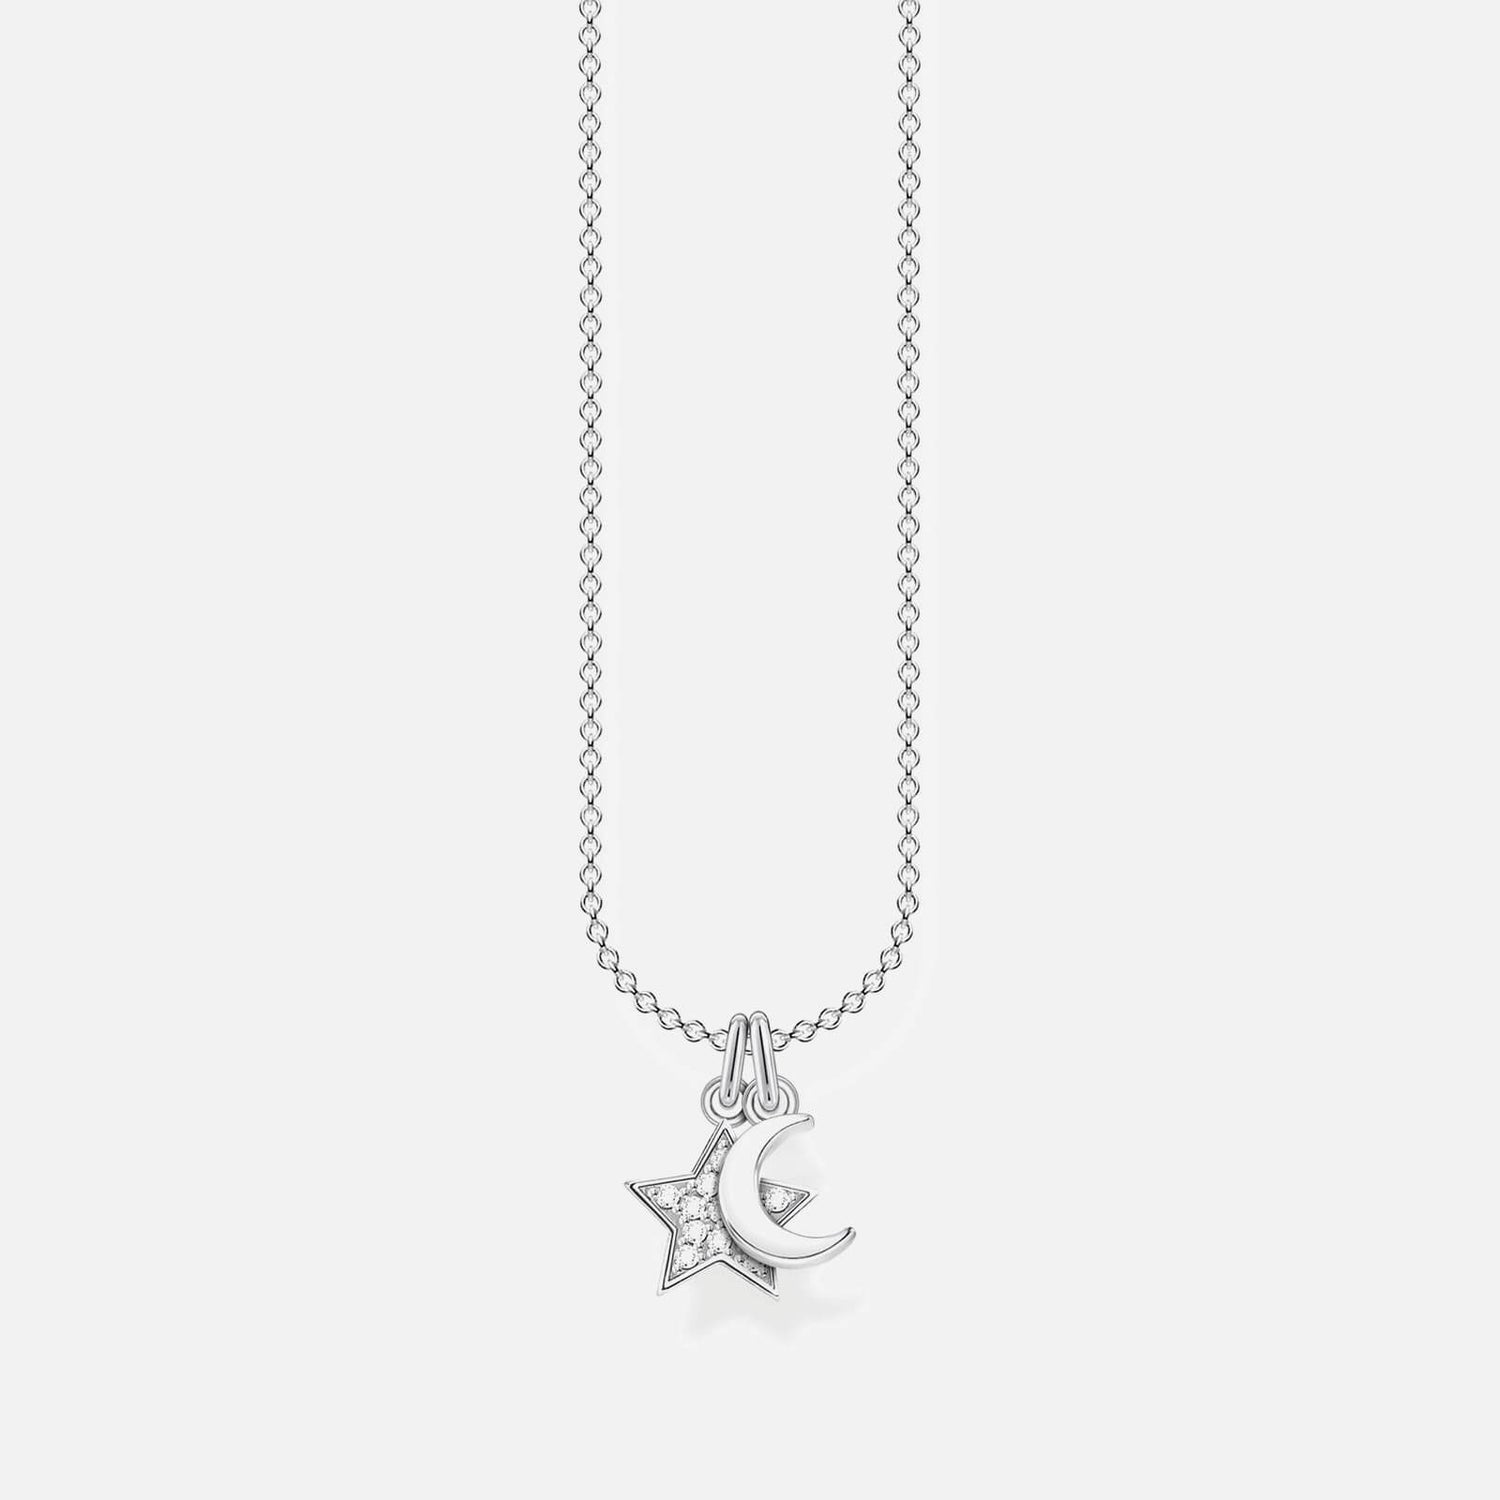 THOMAS SABO Women's Star and Moon Necklace - Silver